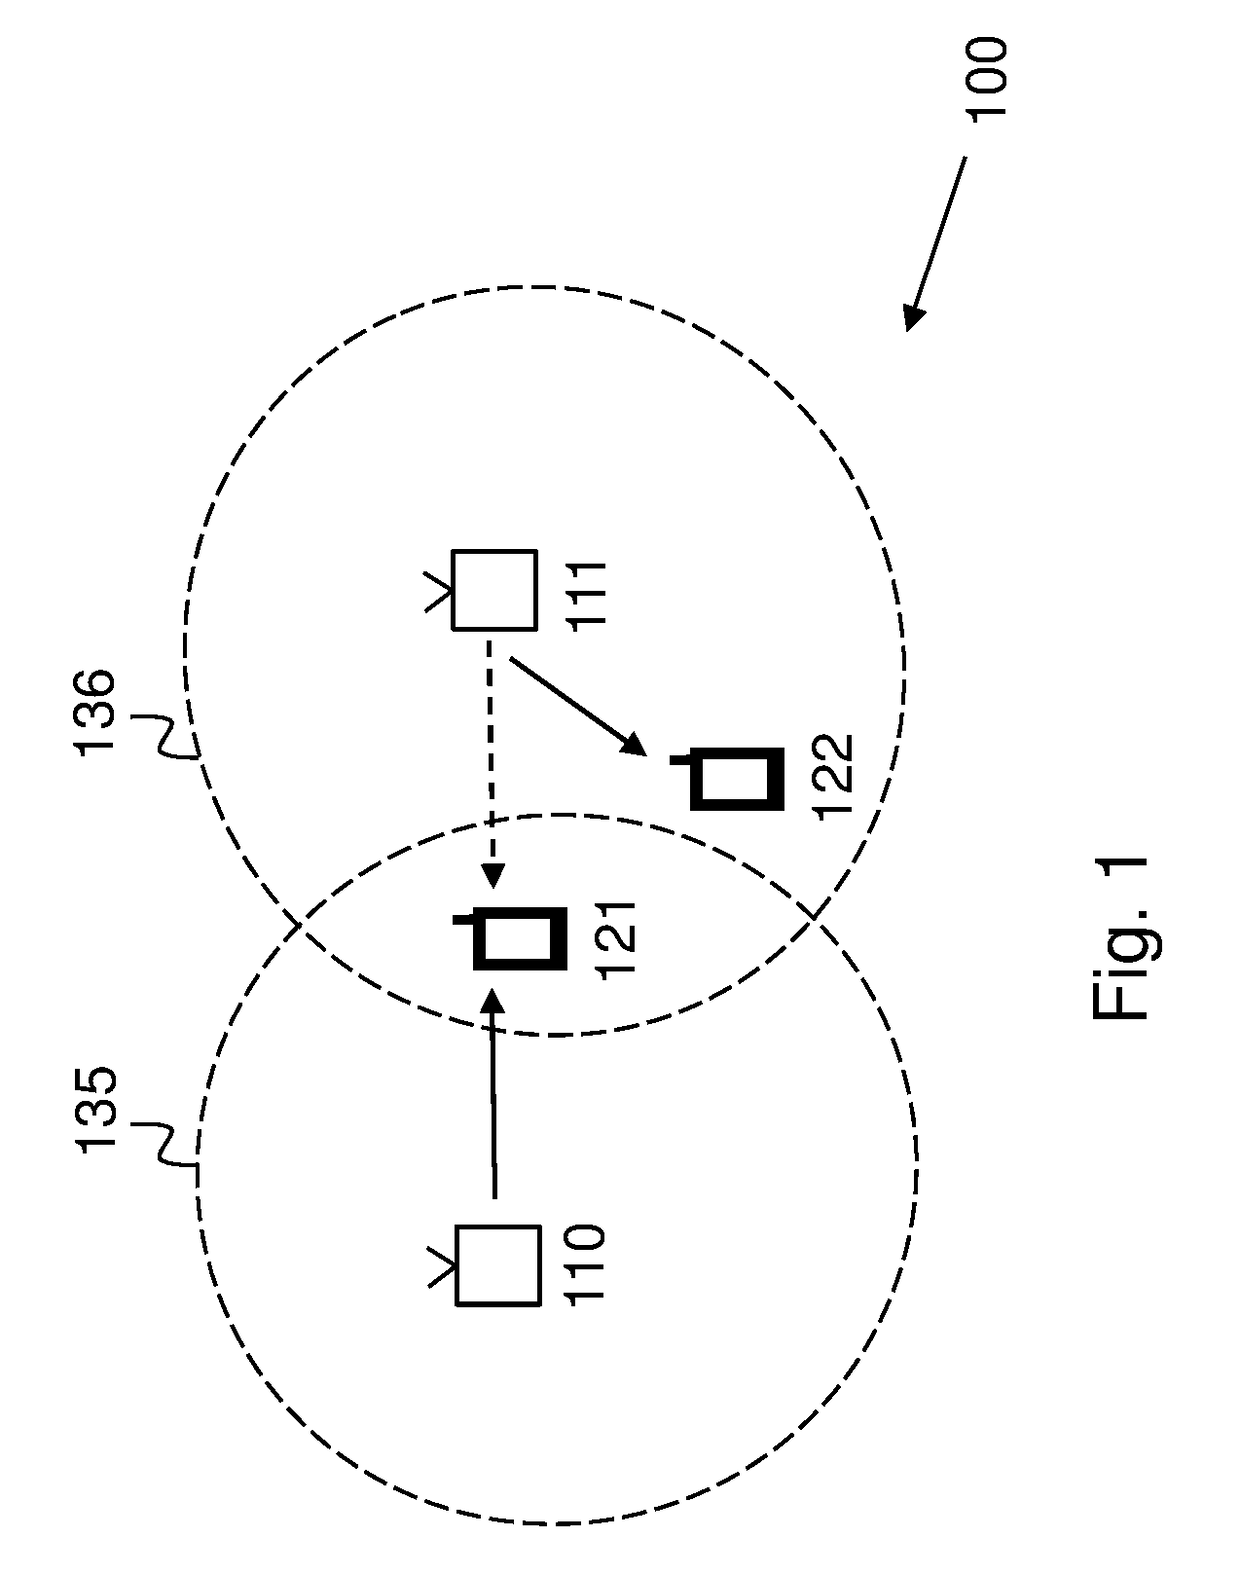 Methods for Reducing Interference in a Wireless Communications Network